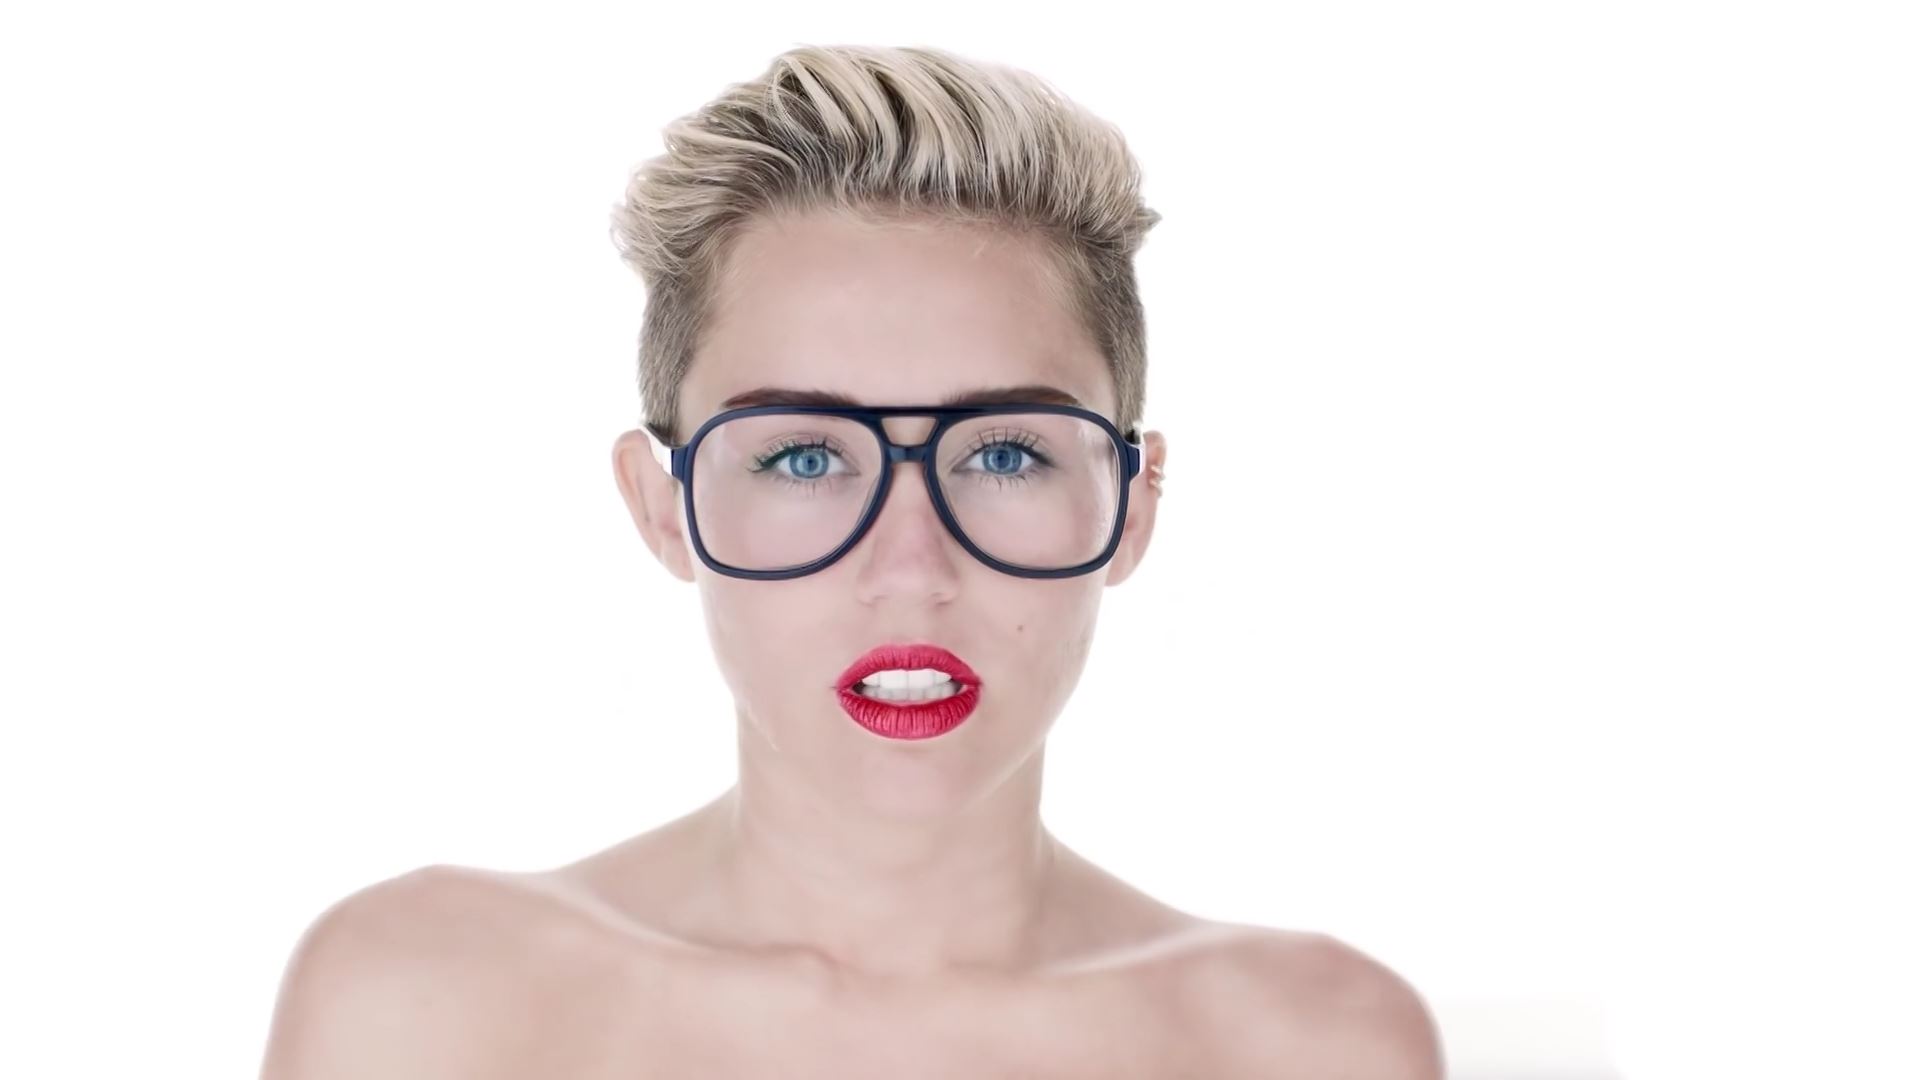 Miley Cyrus - Wrecking Ball - Director's Cut (YouTube-1080p). 